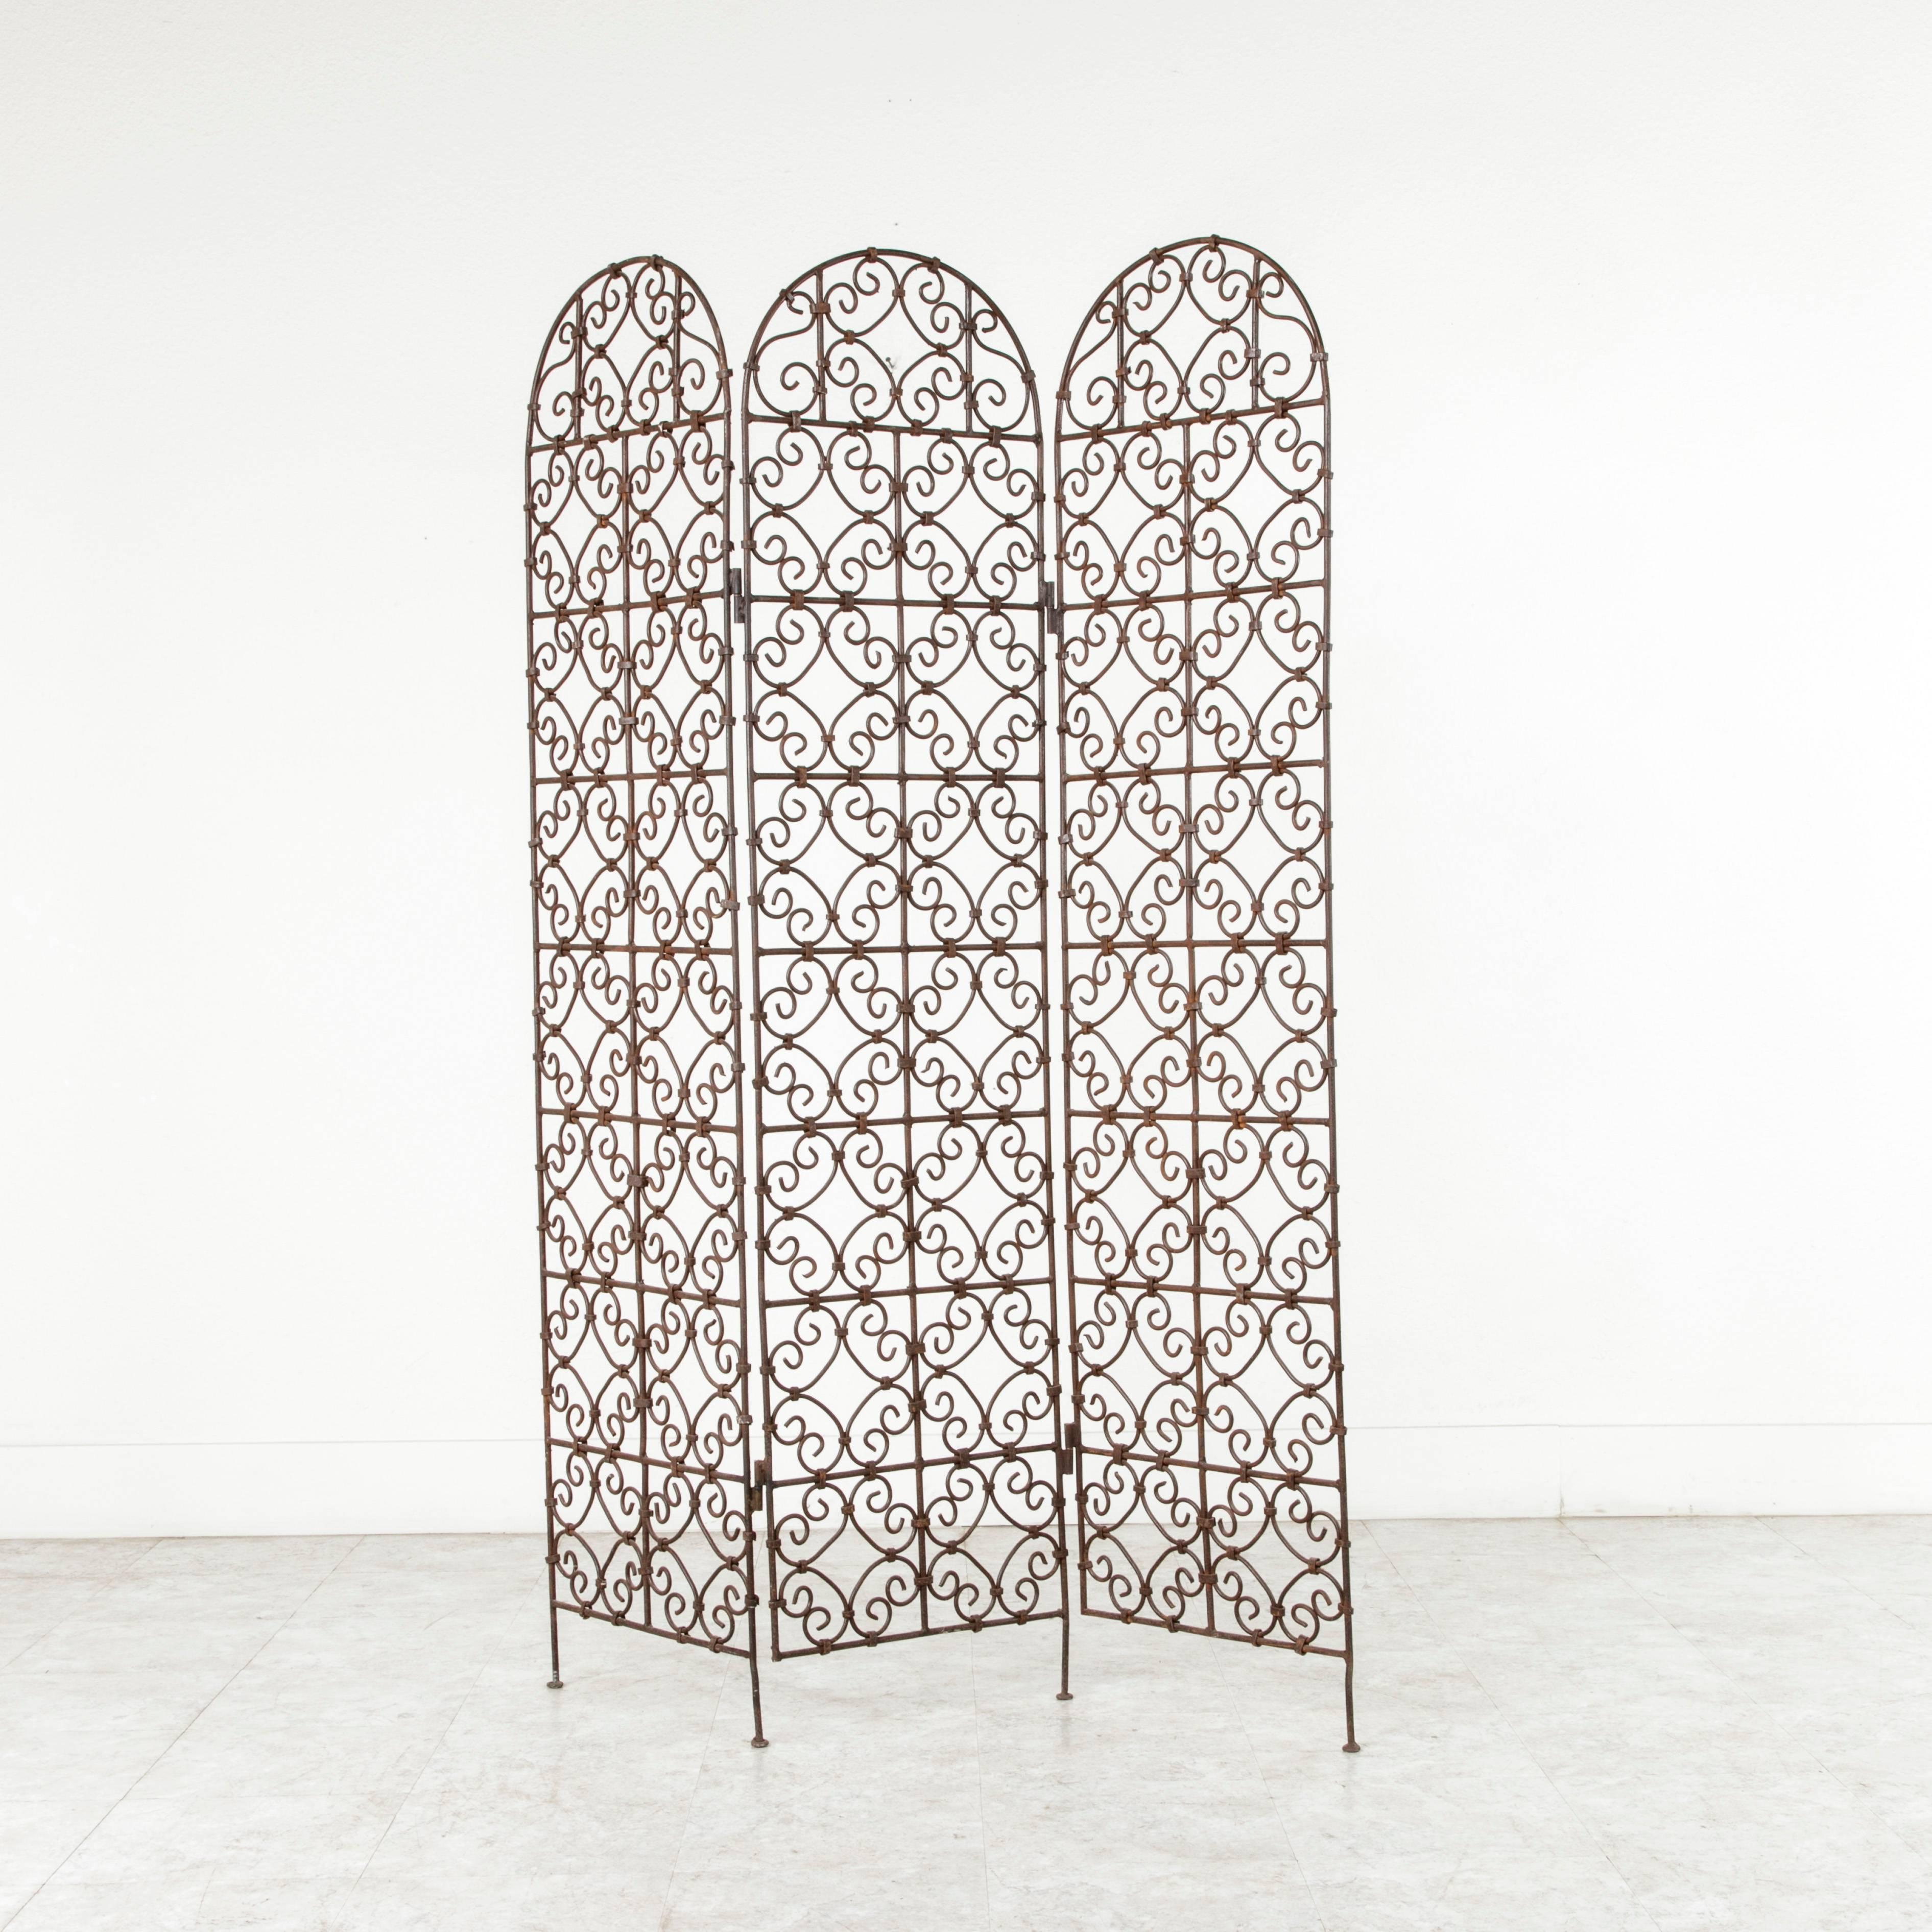 With an intricate hand-forged scrolling pattern, this early 20th century iron folding screen or partition is composed of three panels, each with an arched top. Acquired by a Frenchman in Morocco during the French Colonial period, this artisan-made